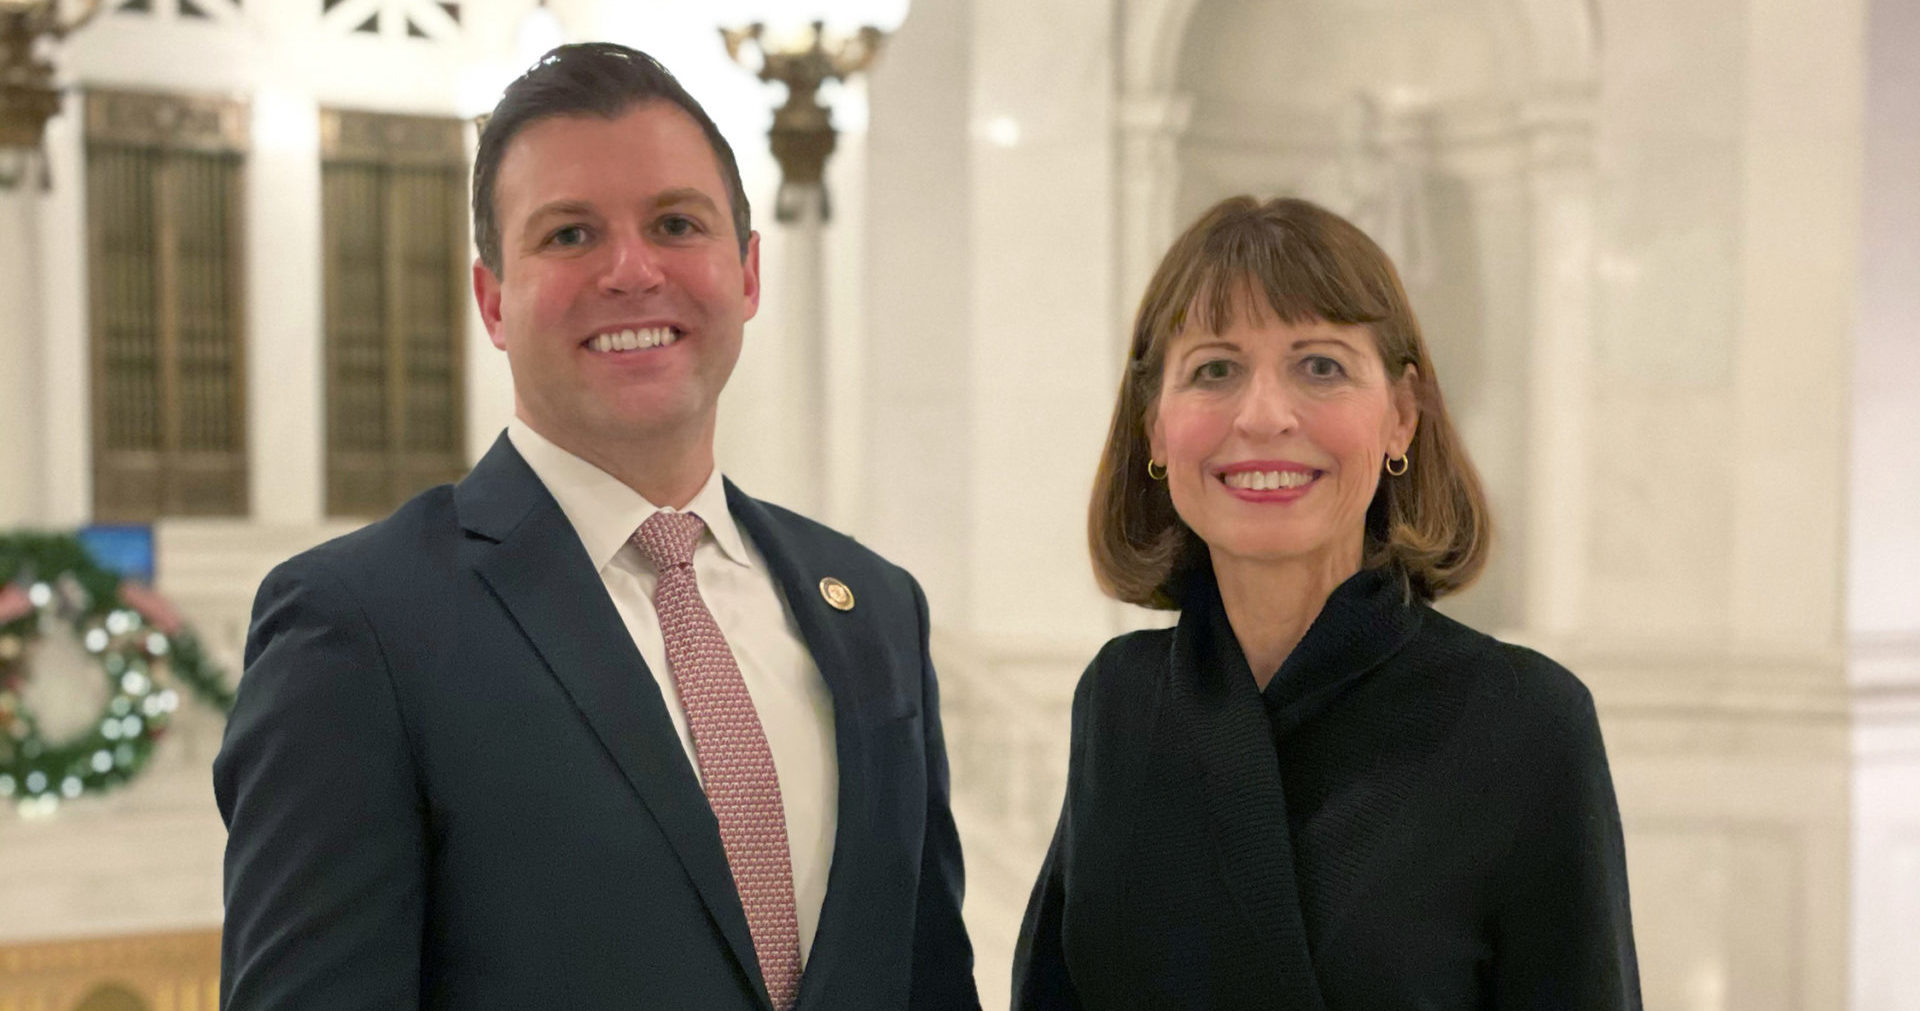 Republican Rep. Ryan Mackenzie, left, and his mother Milou Mackenzie pose at the Capitol on Jan. 5, 2021, in Harrisburg, Pennsylvania.